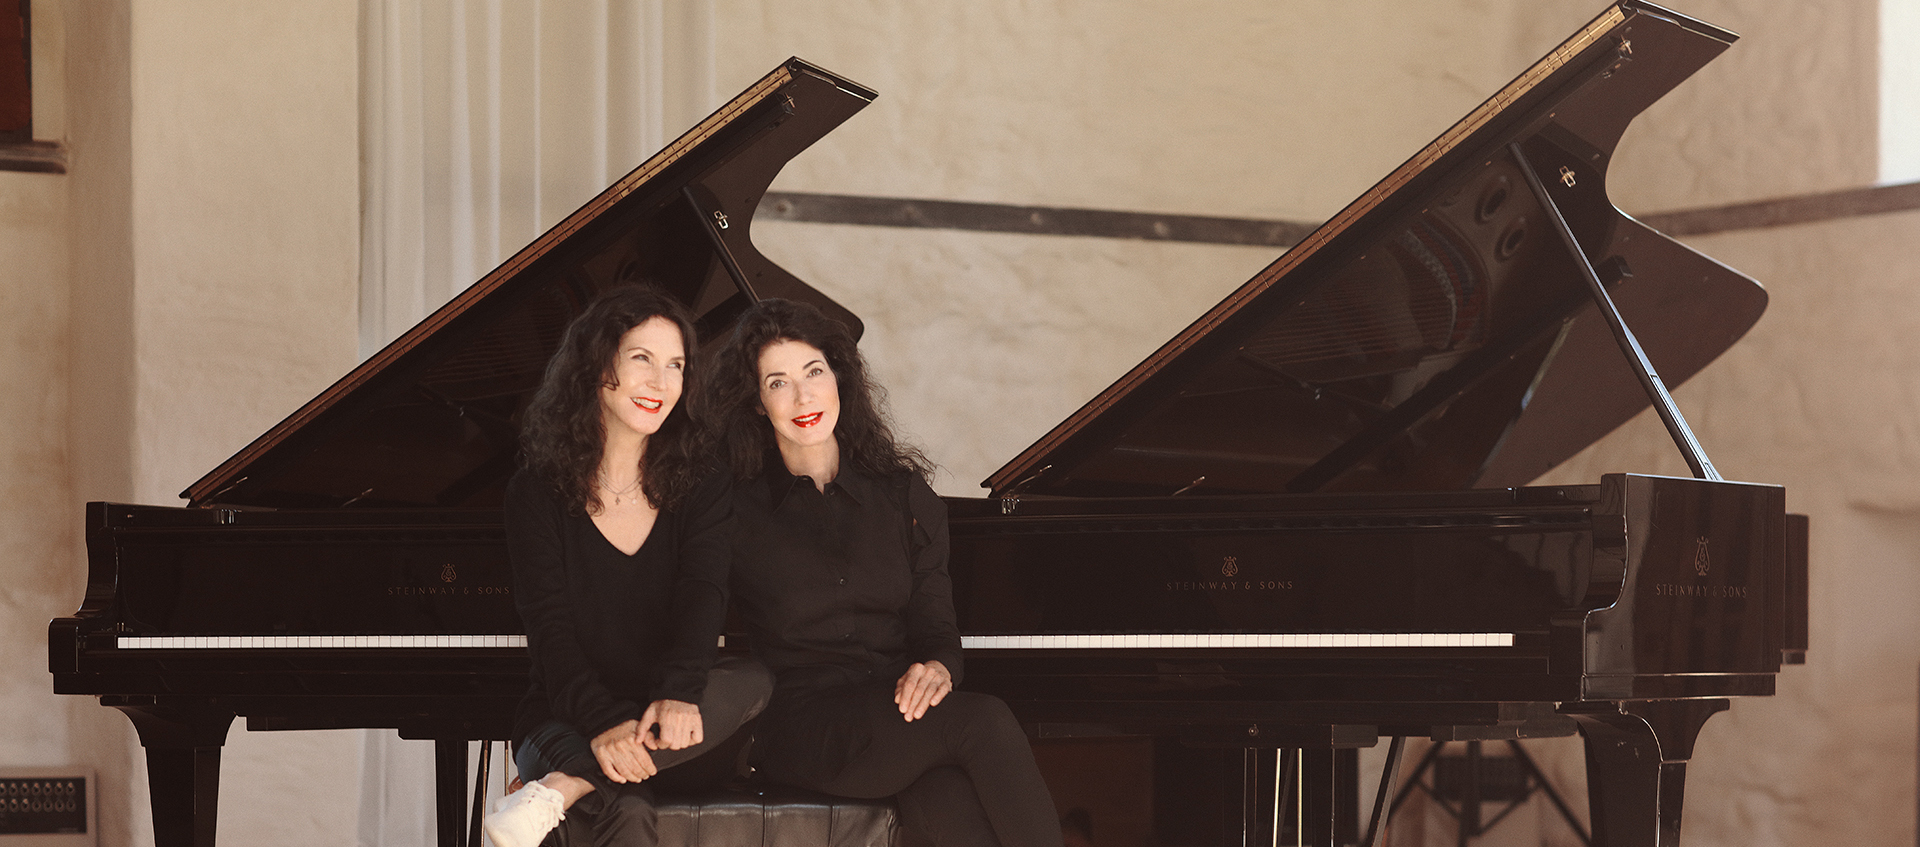 The Labèque Sisters seated in front of two pianos